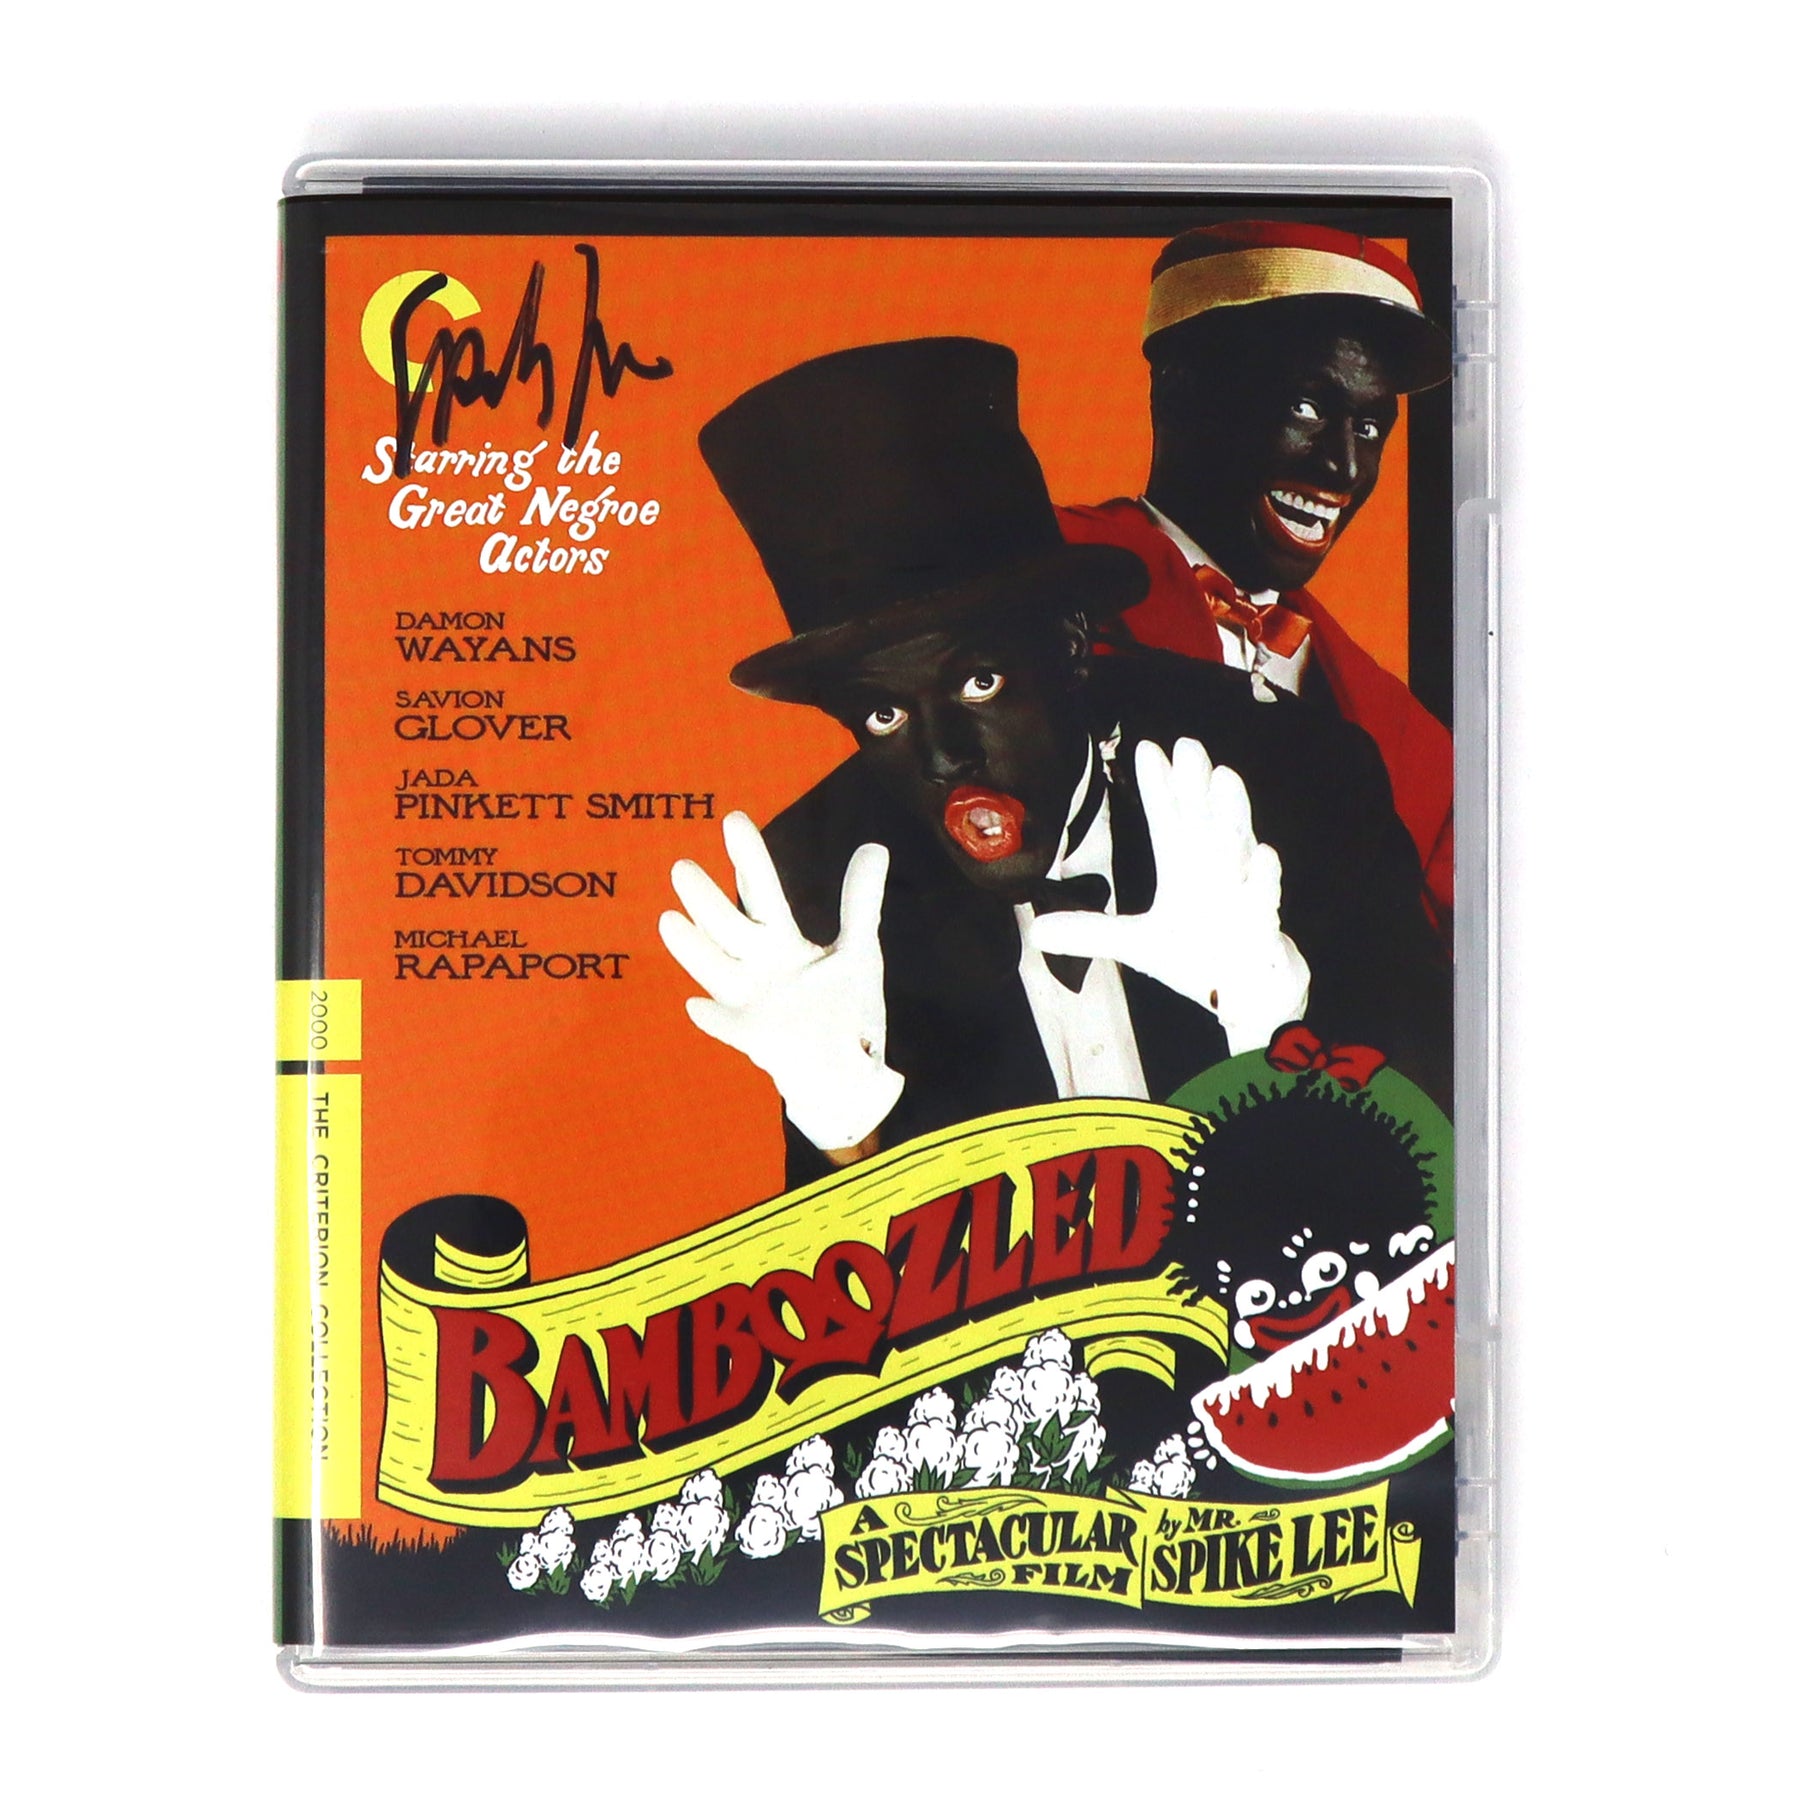 Bamboozled Blue-Ray - Criterion Edition – 